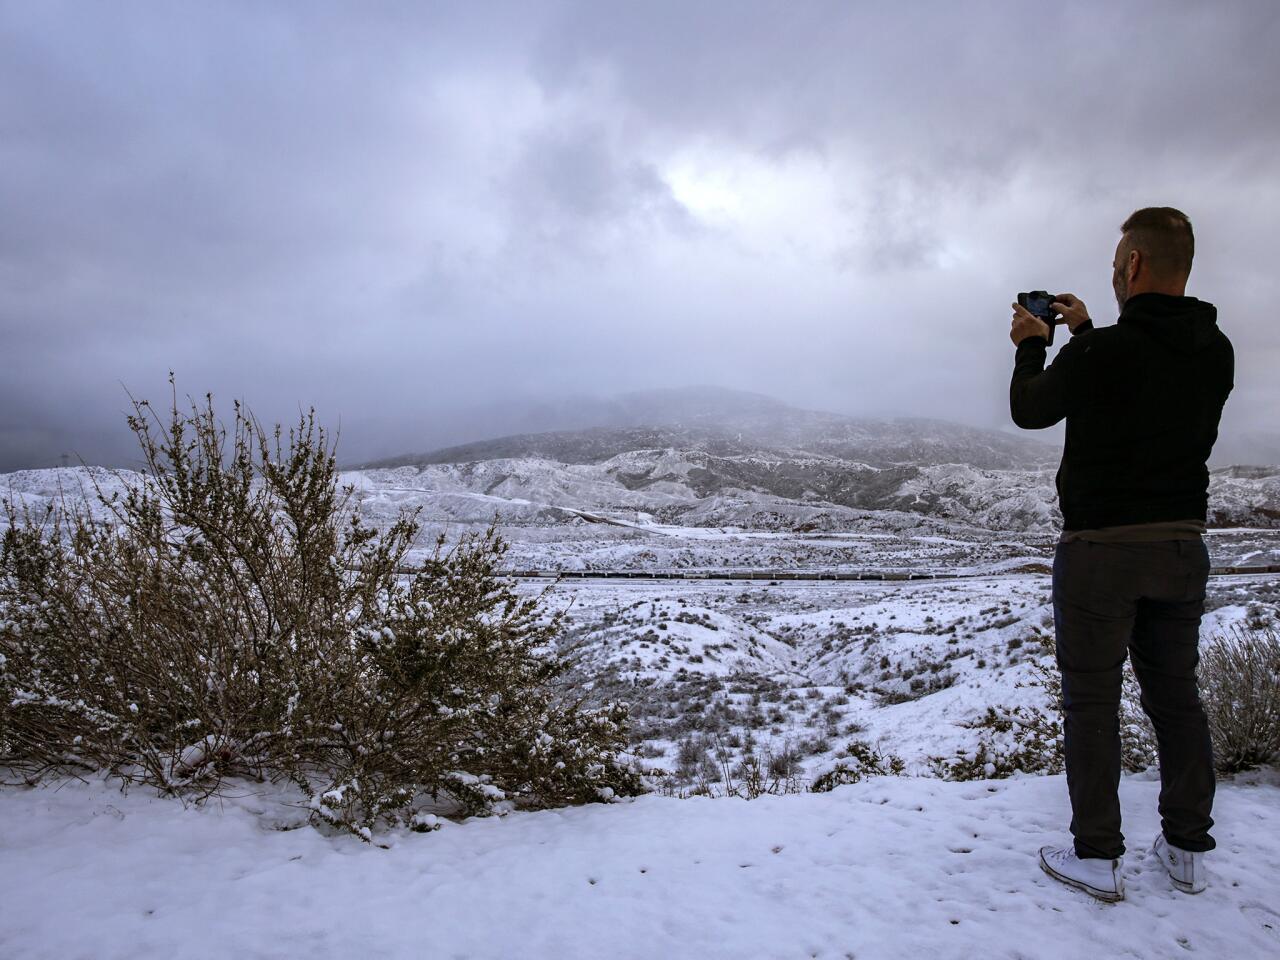 Snow level drops to low elevations around Southland